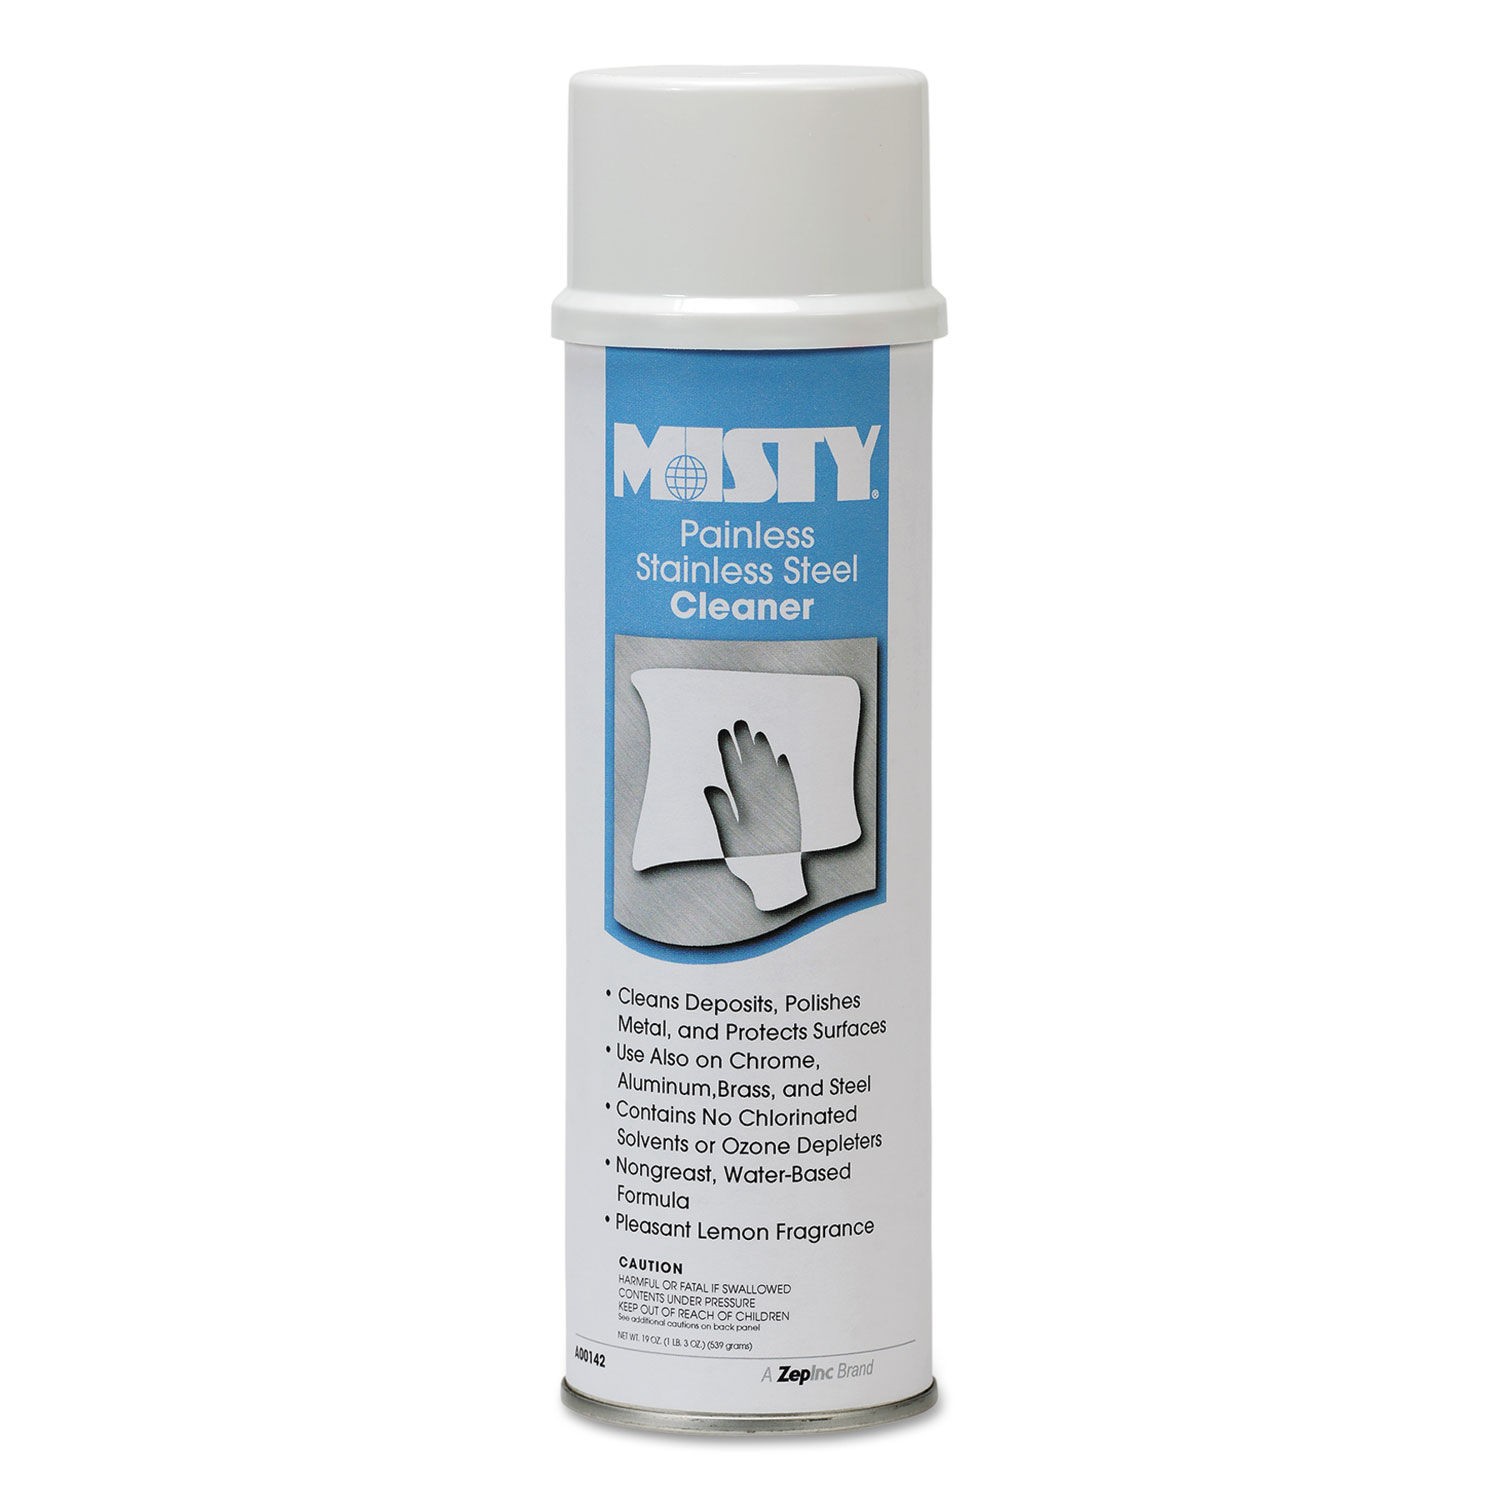 Misty Water-Based Stainless Steel Cleaner, 18 oz. Aerosol Cans, 12/Carton